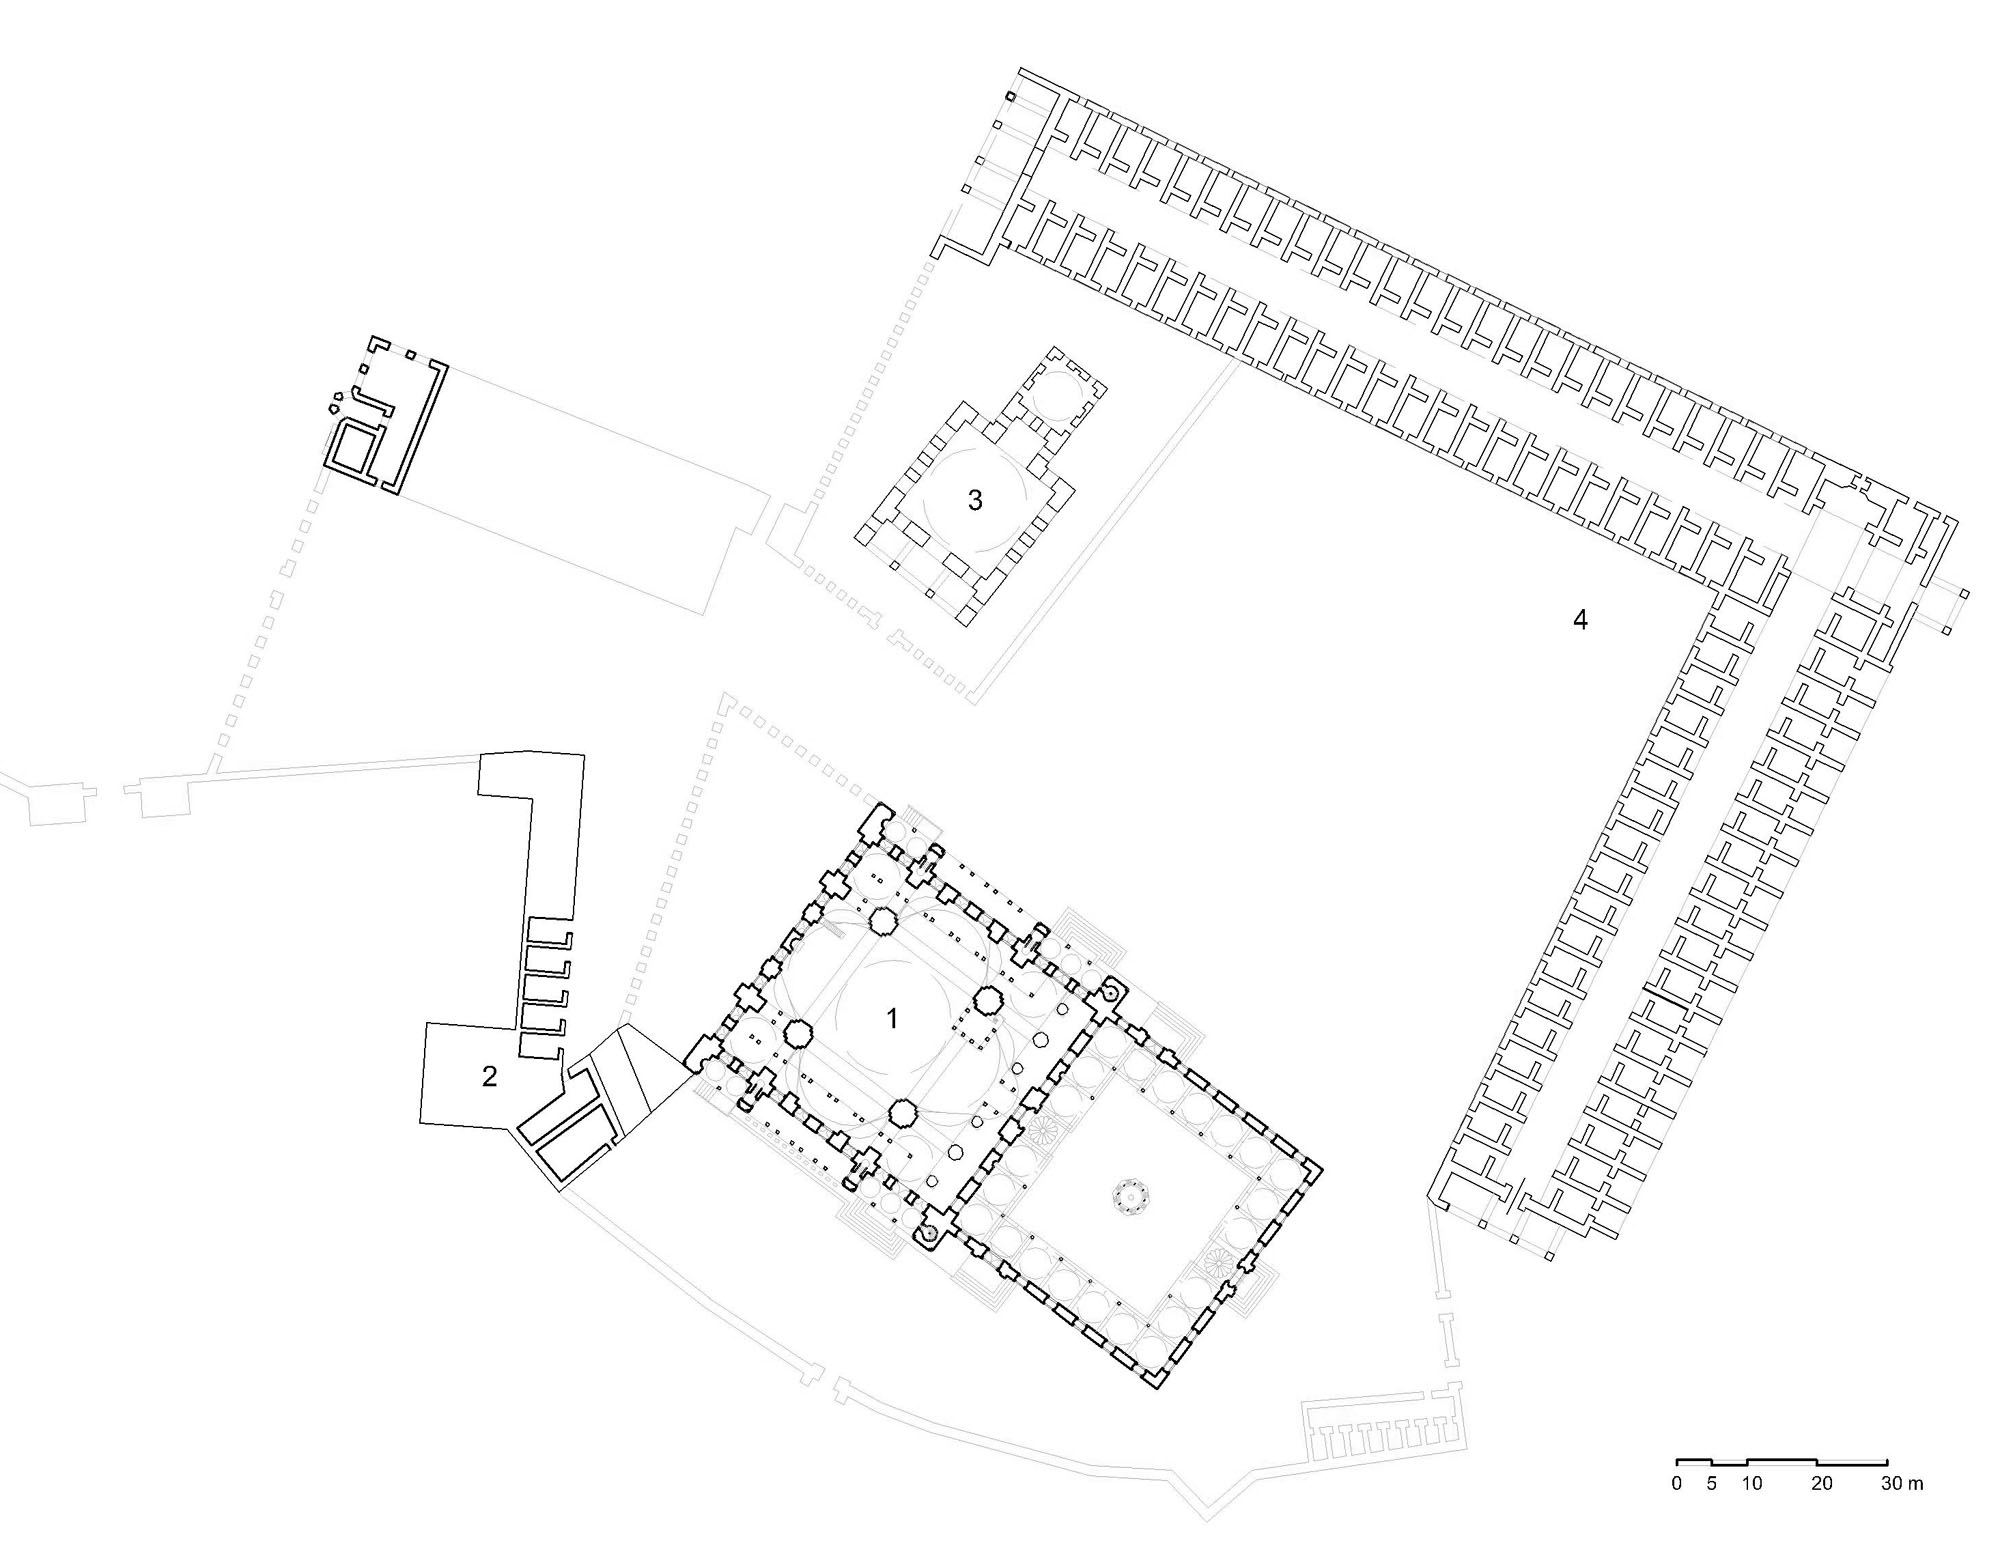 Yeni Camii Külliyesi - Floor plan of complex with (1) mosque, (2) ramp to the royal pavilion, (3) mausoleum, (4) covered bazaar. DWG file in AutoCAD 2000 format. Click the download button to download a zipped file containing the .dwg file.